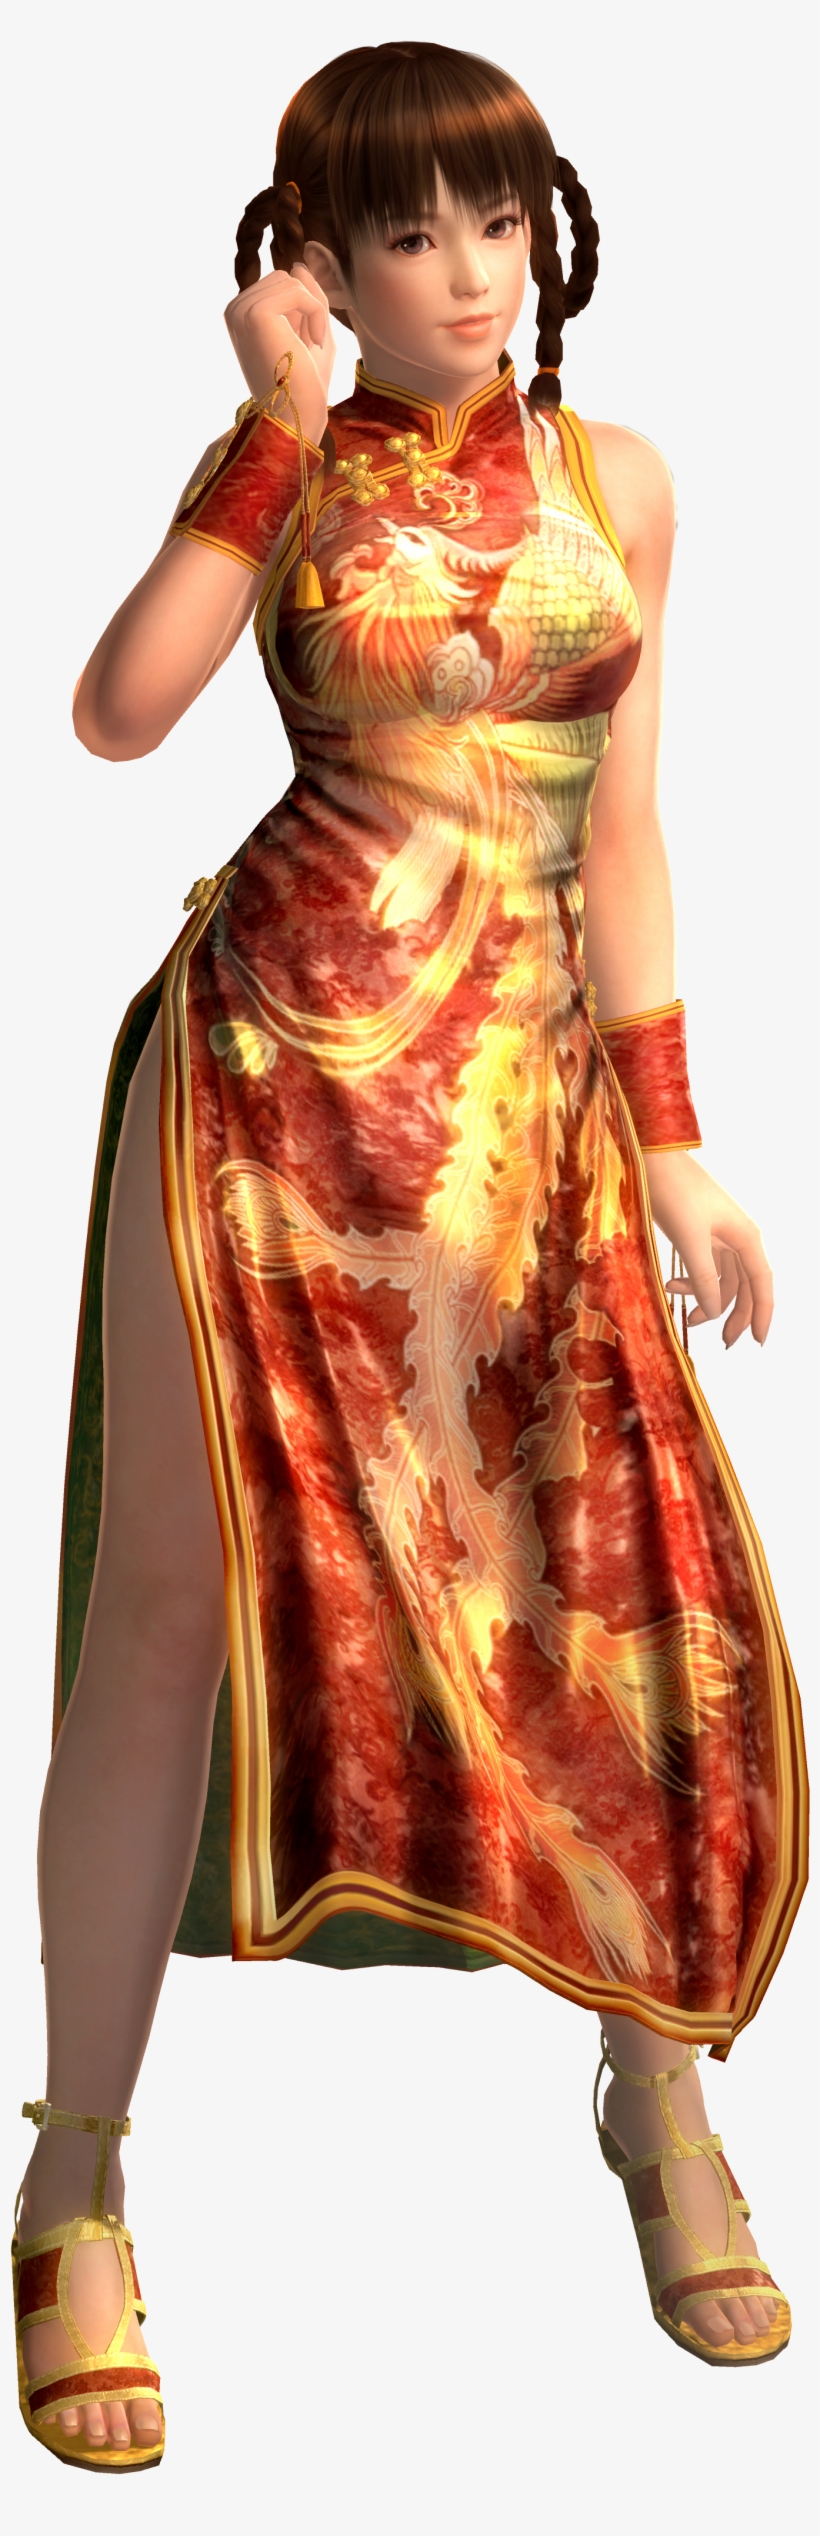 Download Png - Lei Fang Doa 5, transparent png #531321